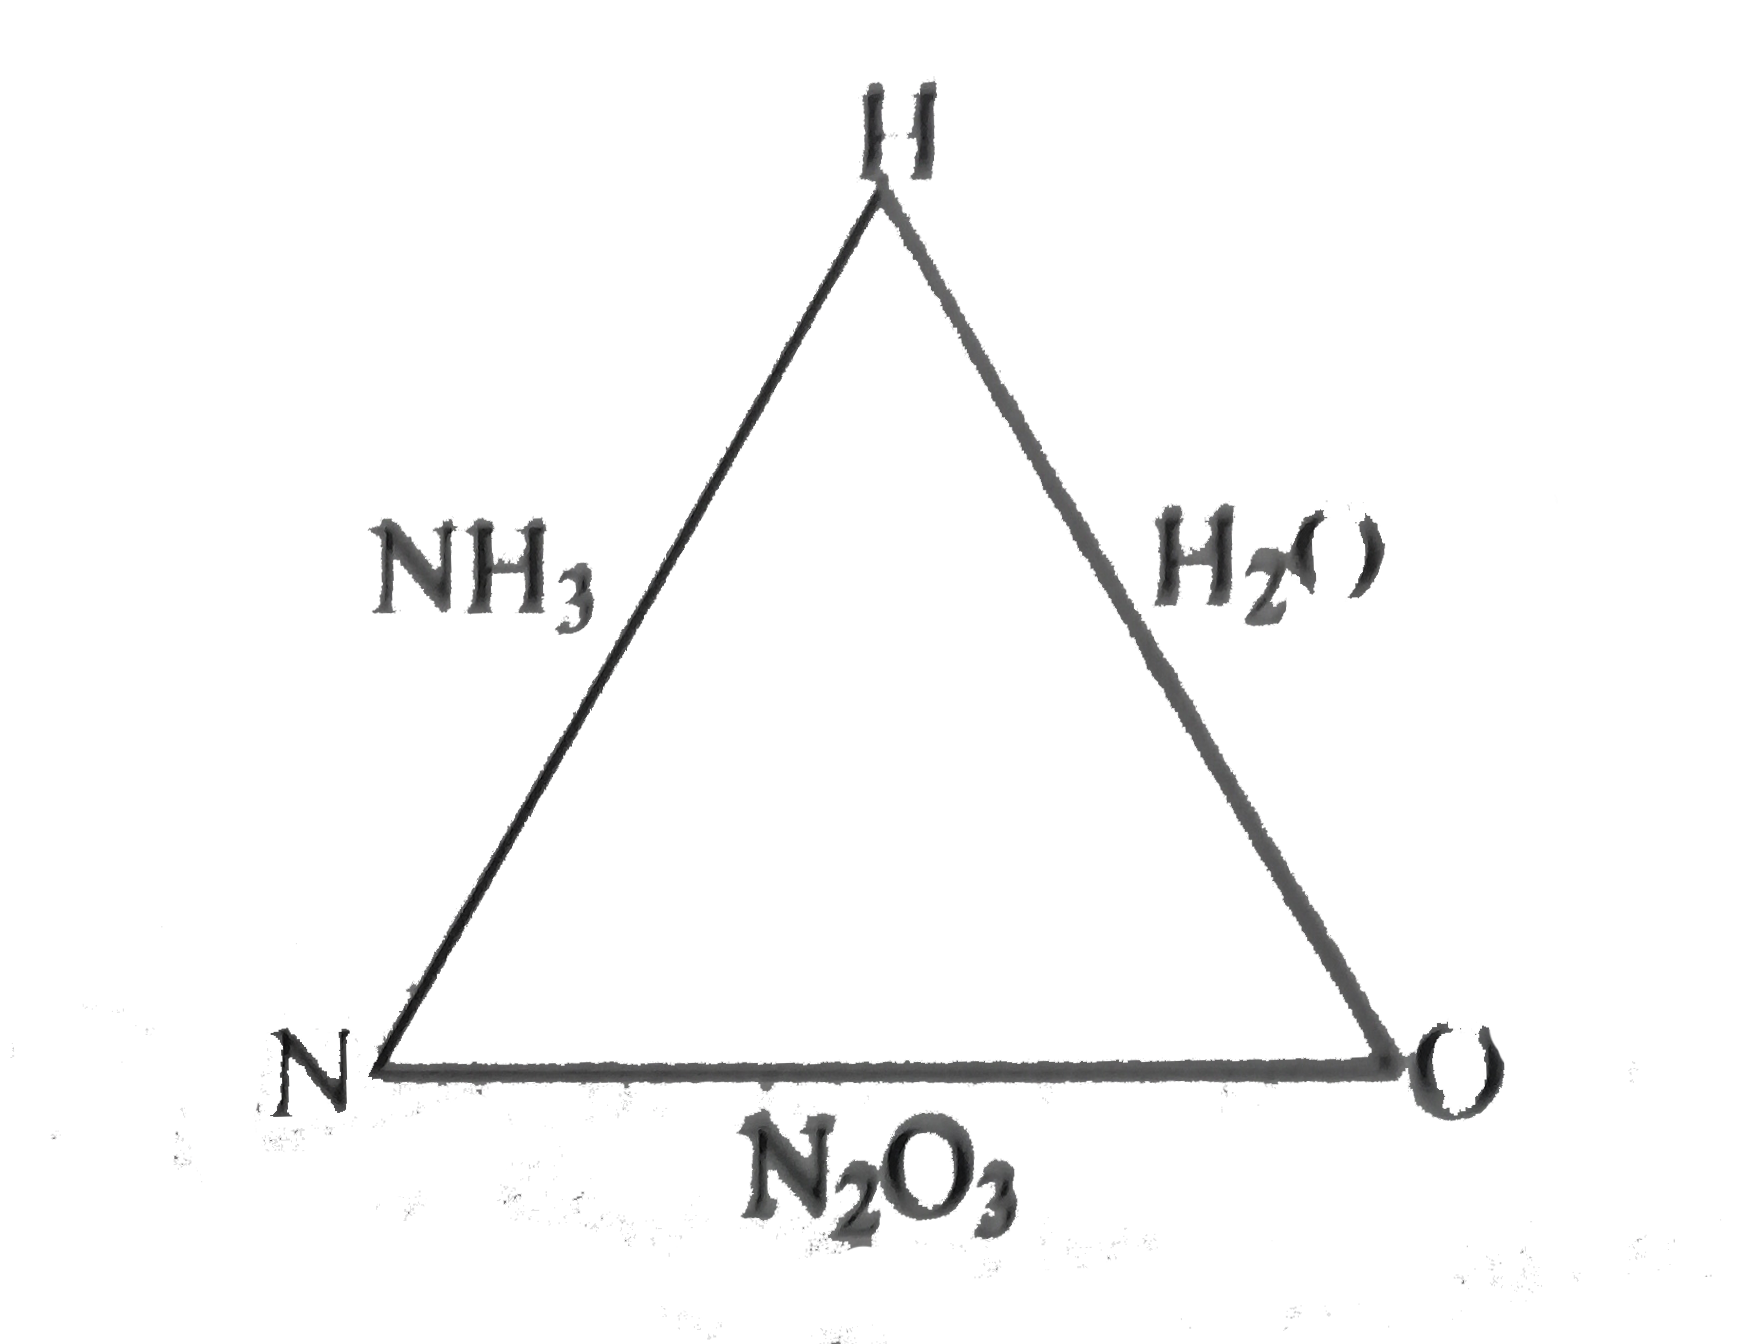 Ammonia contains 82.35% of nitrogen and 17.65% of hydrogen. Water contains 88.90% of oxygen 63.15% of oxygen and 36.85% of nitrogen. Show by calculations from these data which law of chemicmal combination is verified.